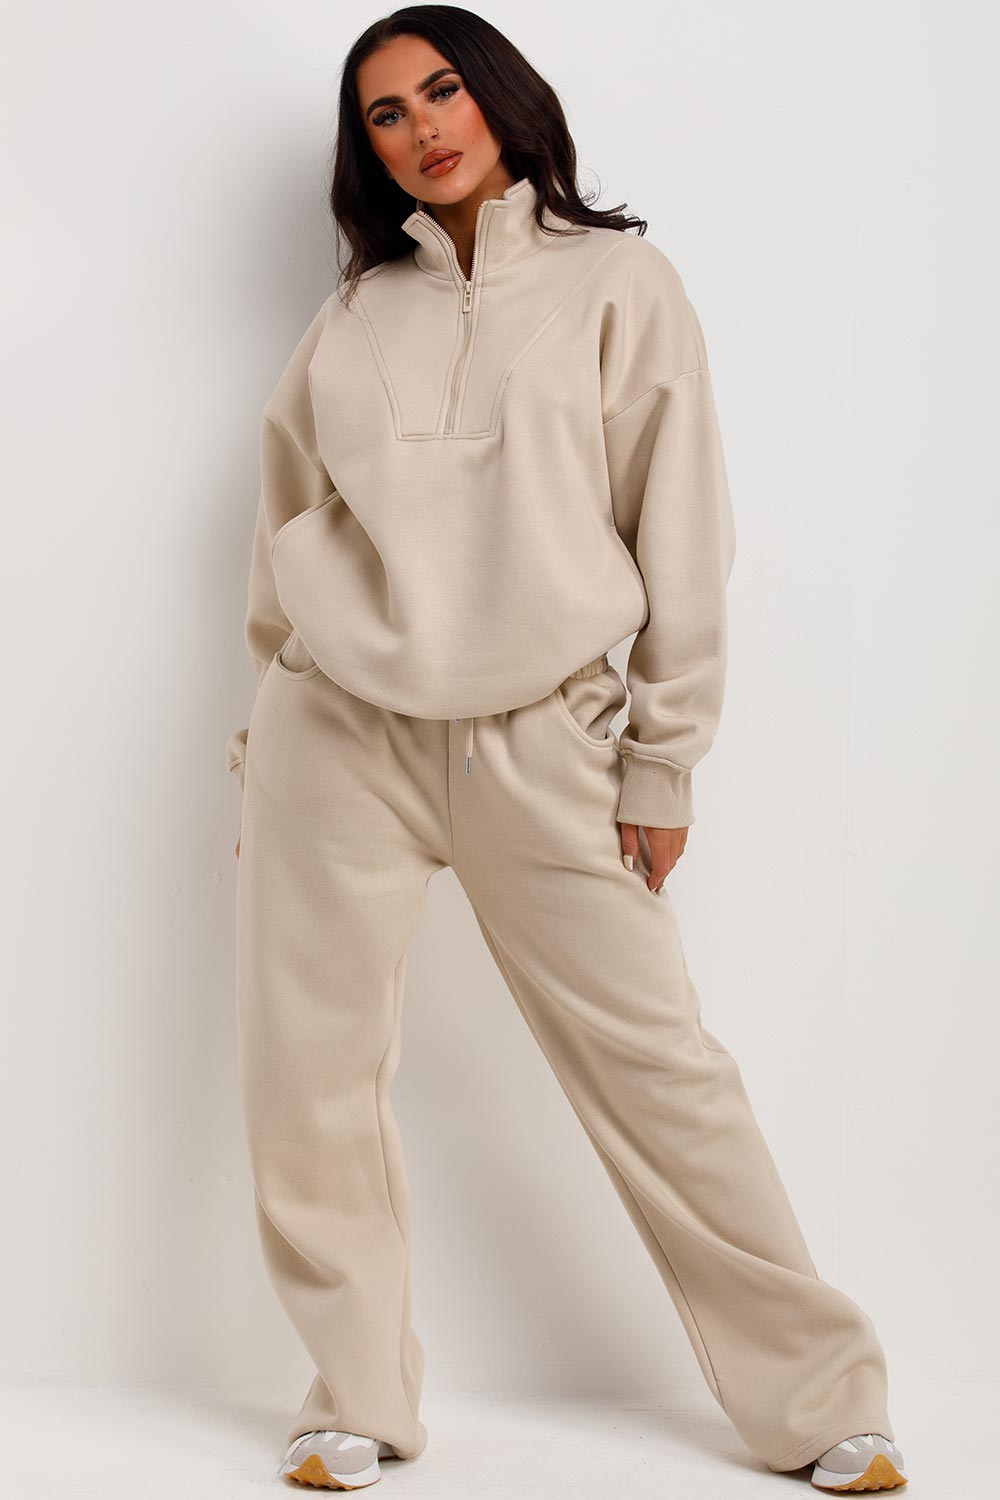 womens half zip sweatshirt and joggers loungewear co ord airport outfit